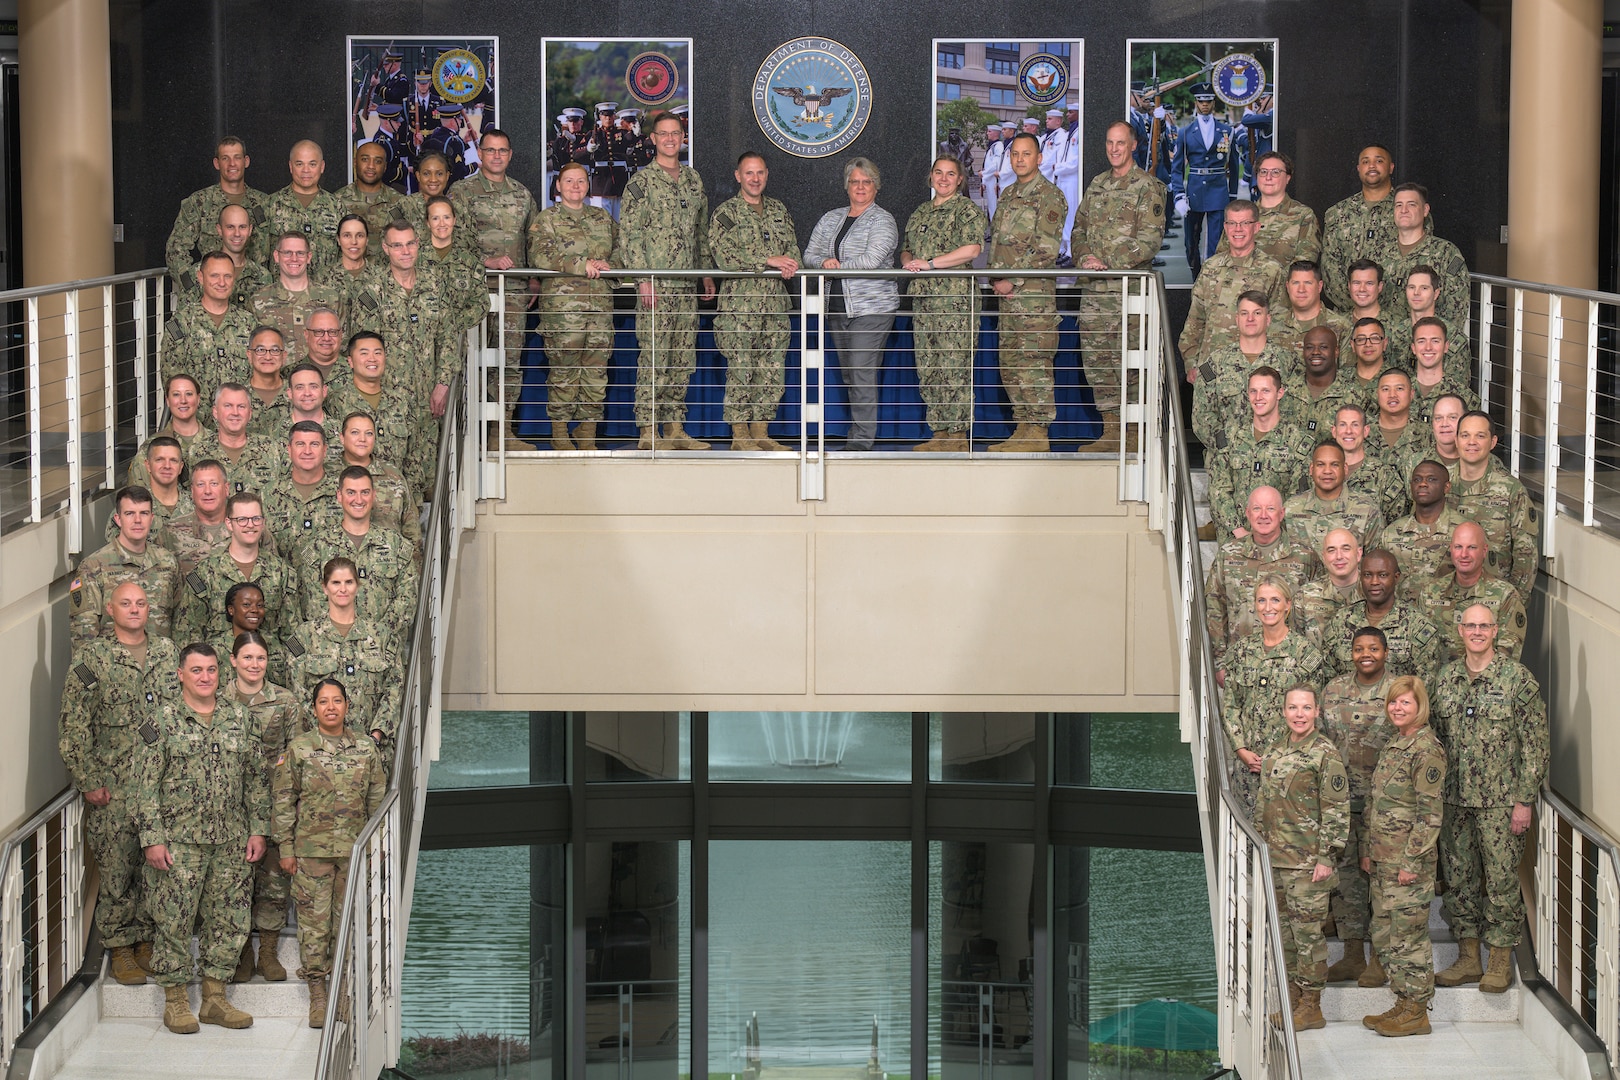 Group photo of DLA Joint Reserve Force Leaders